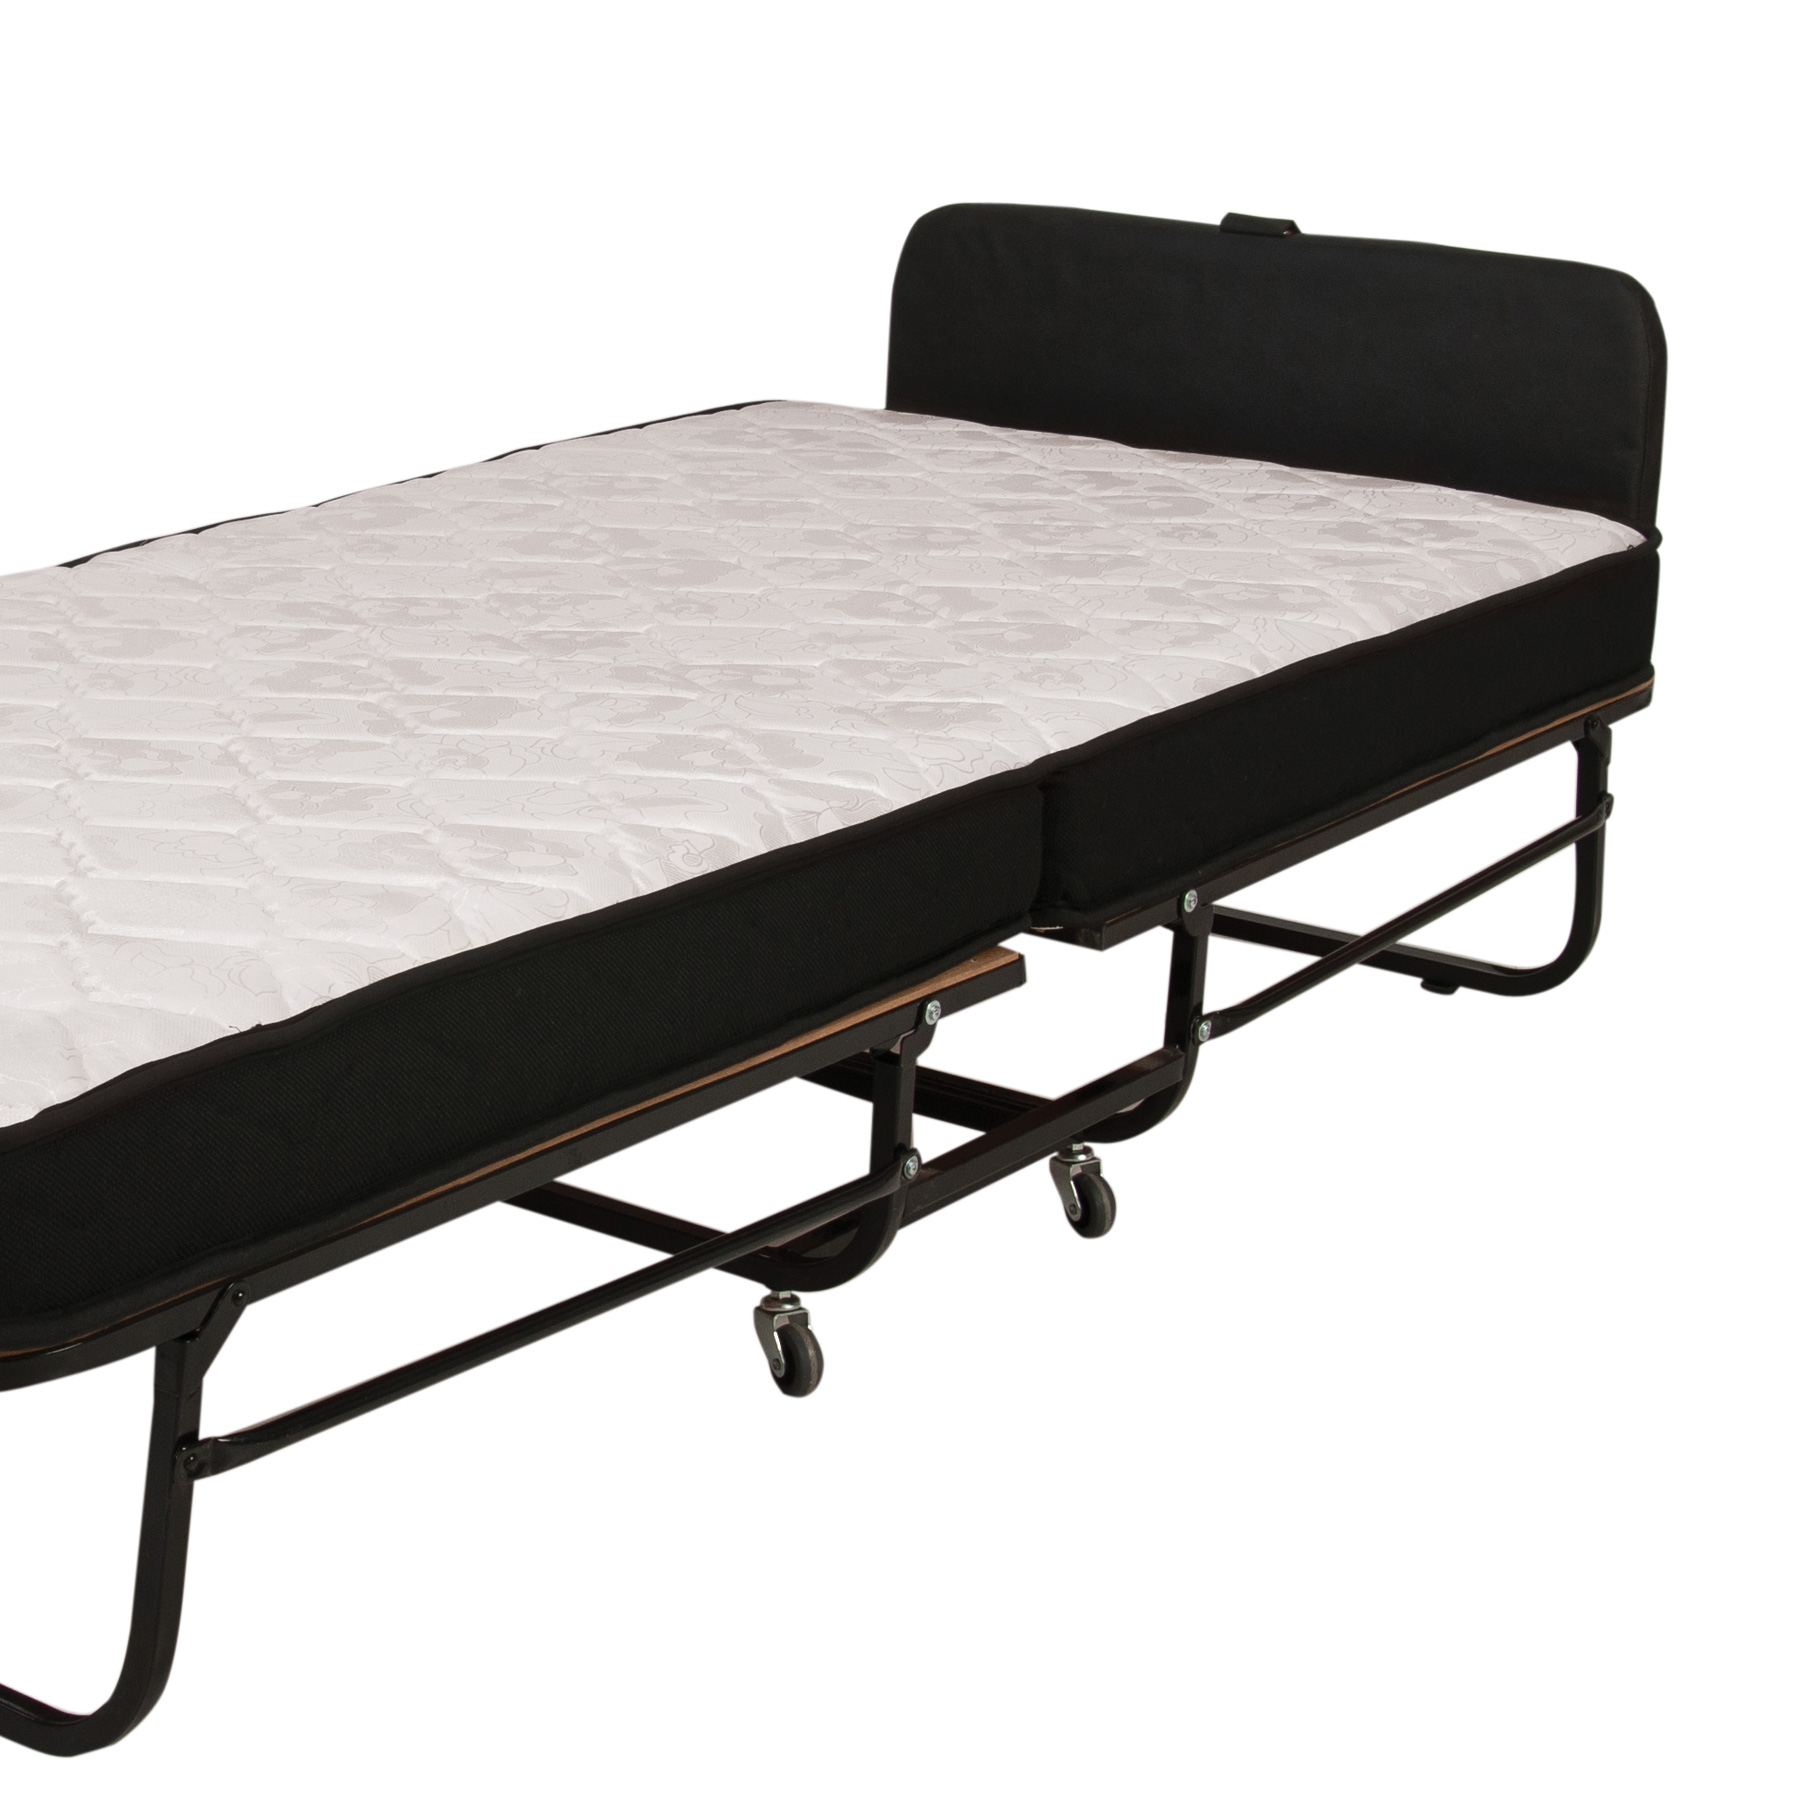 Niron Xl Folding Bed Extra Guest Beds, Folding Bed Frame Philippines